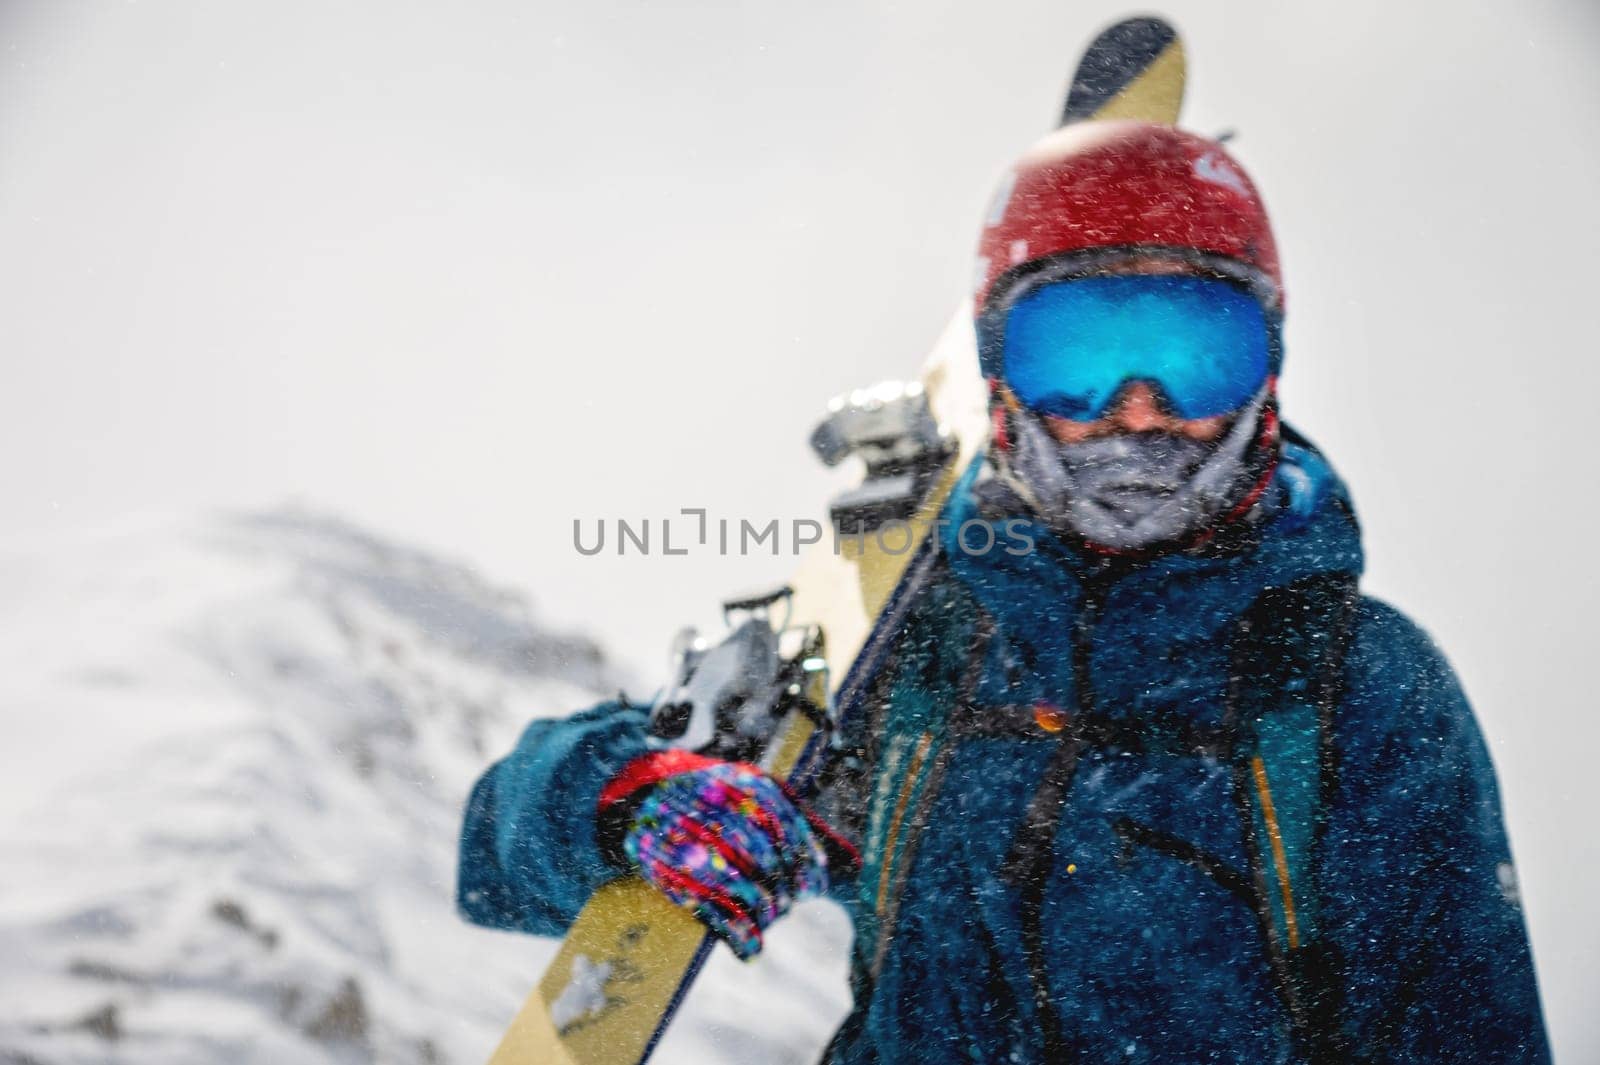 Defocused skier portrait during a snowstorm high in the mountains. Focus on the snow particles in front of the skier. Copy space top skier in blur by yanik88